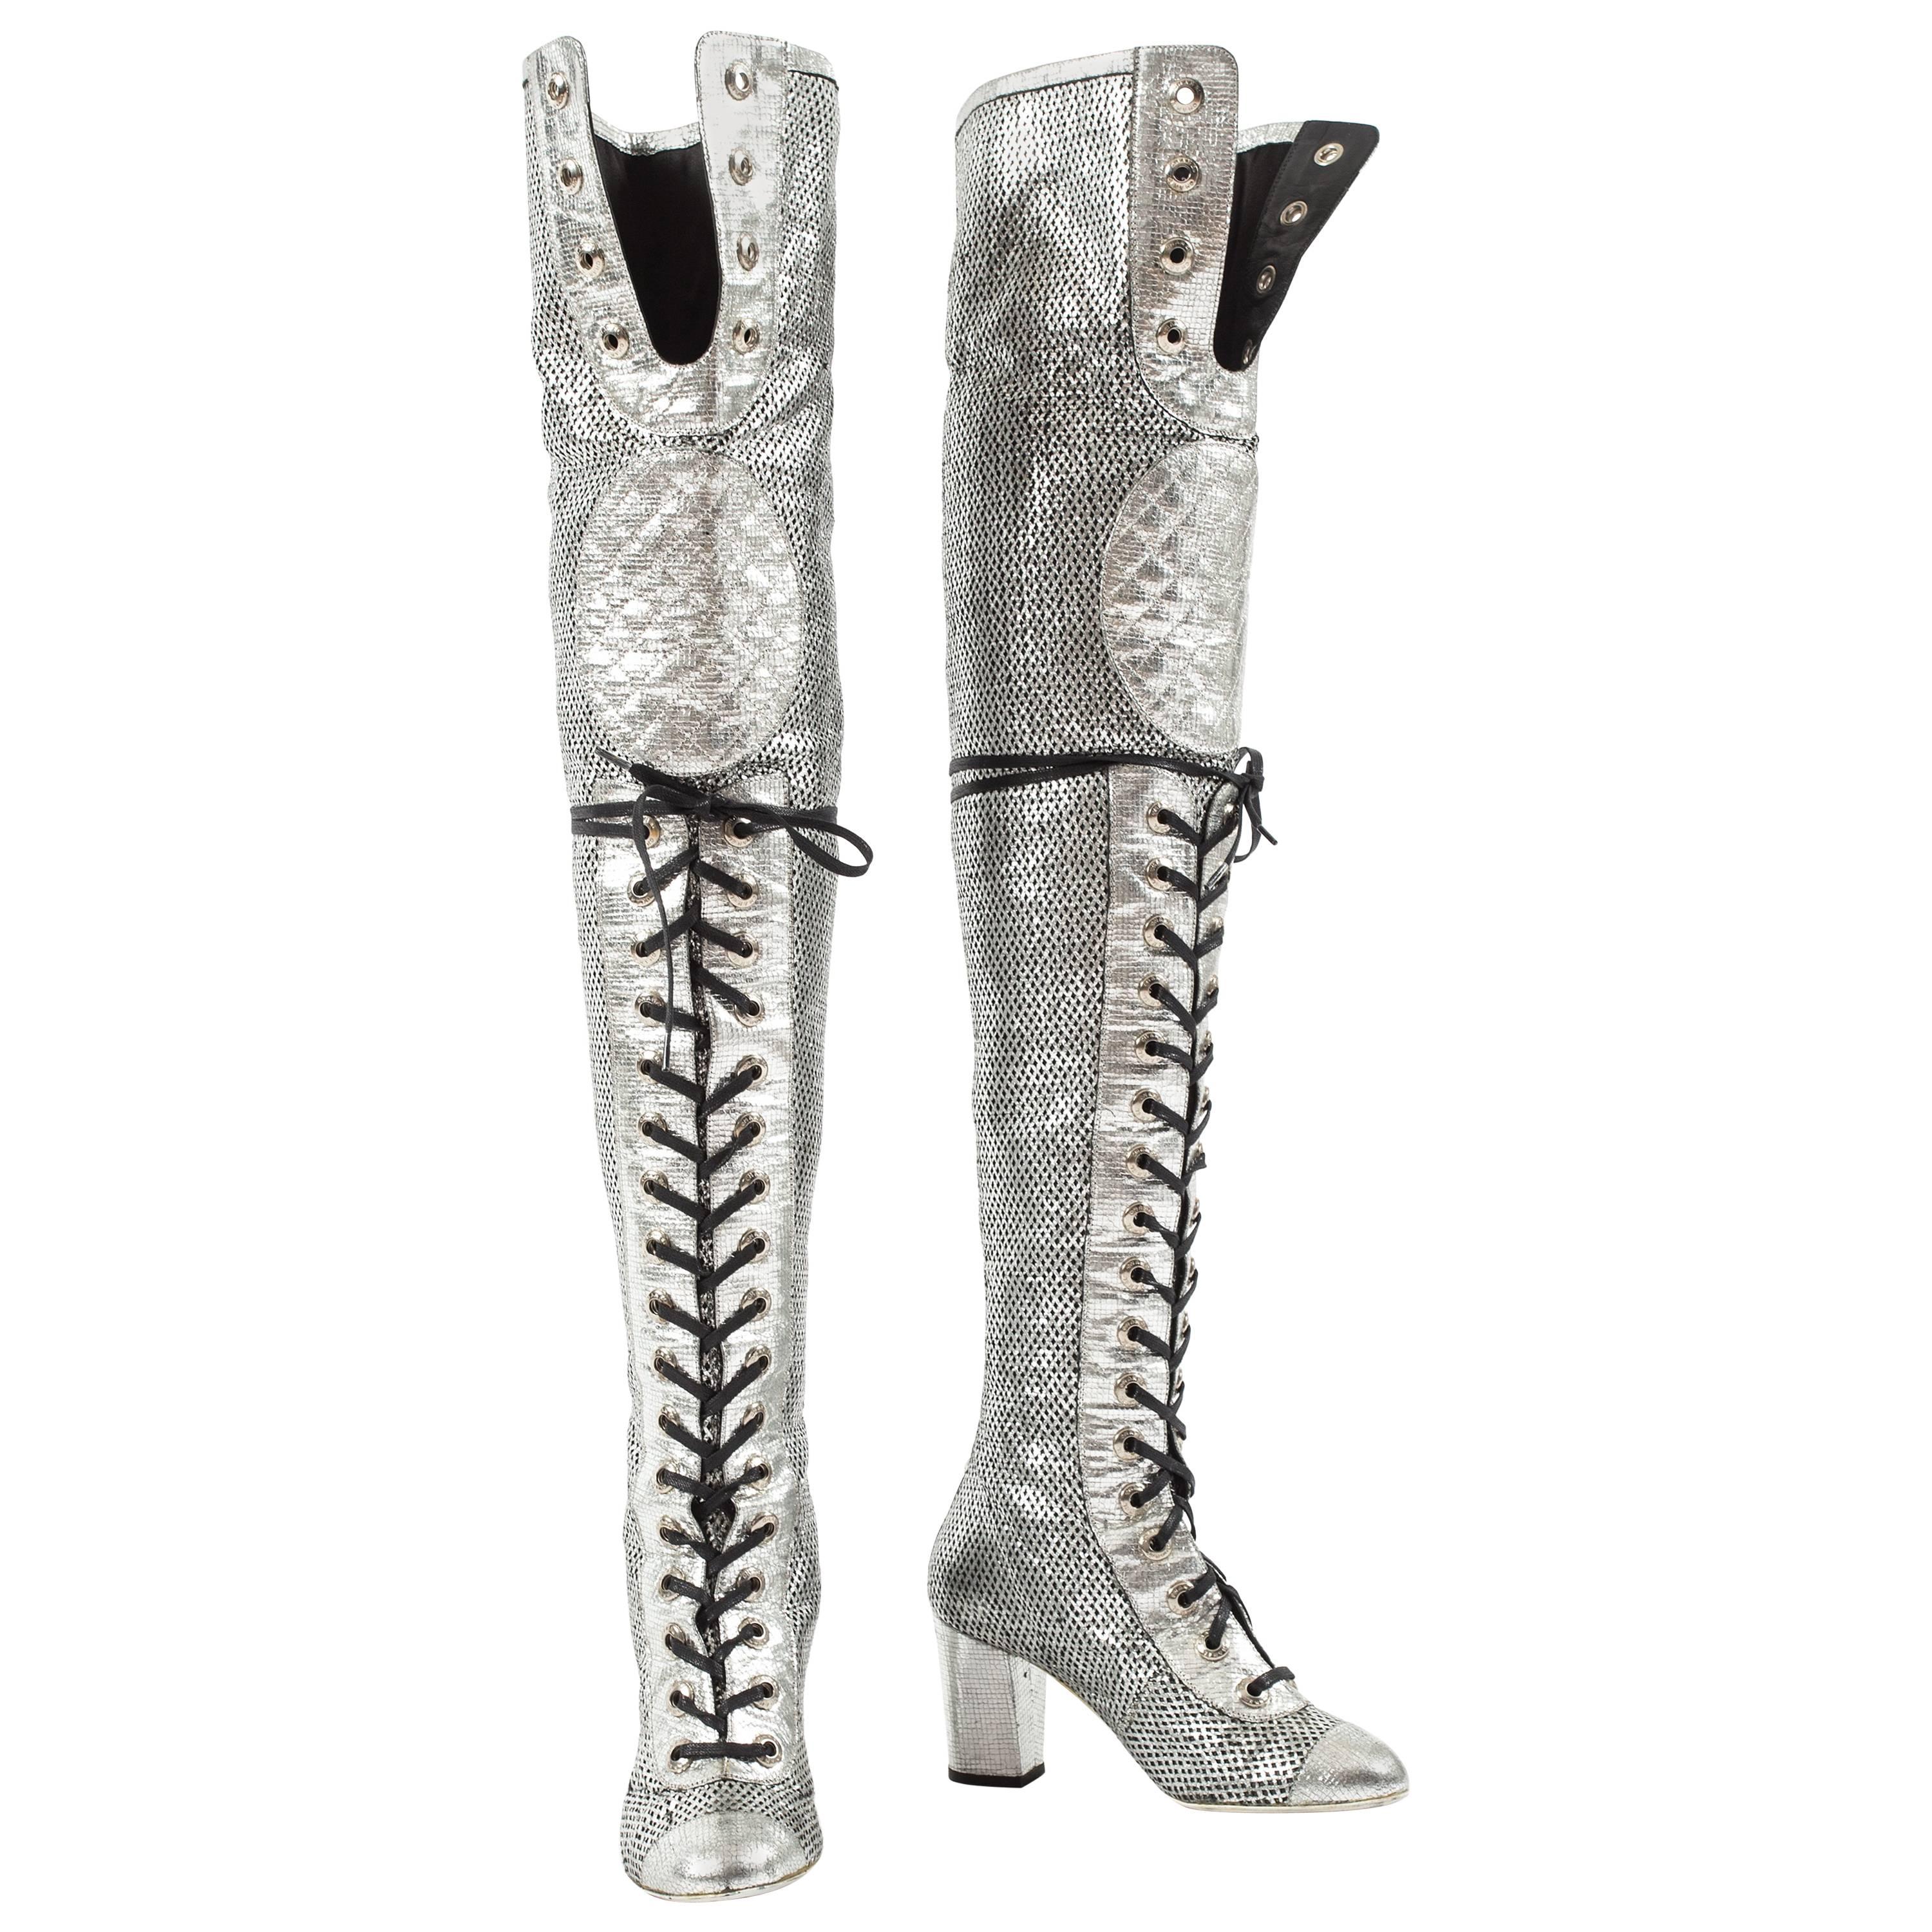 Chanel Spring-Summer 2008 metallic silver thigh high laser cut leather boots